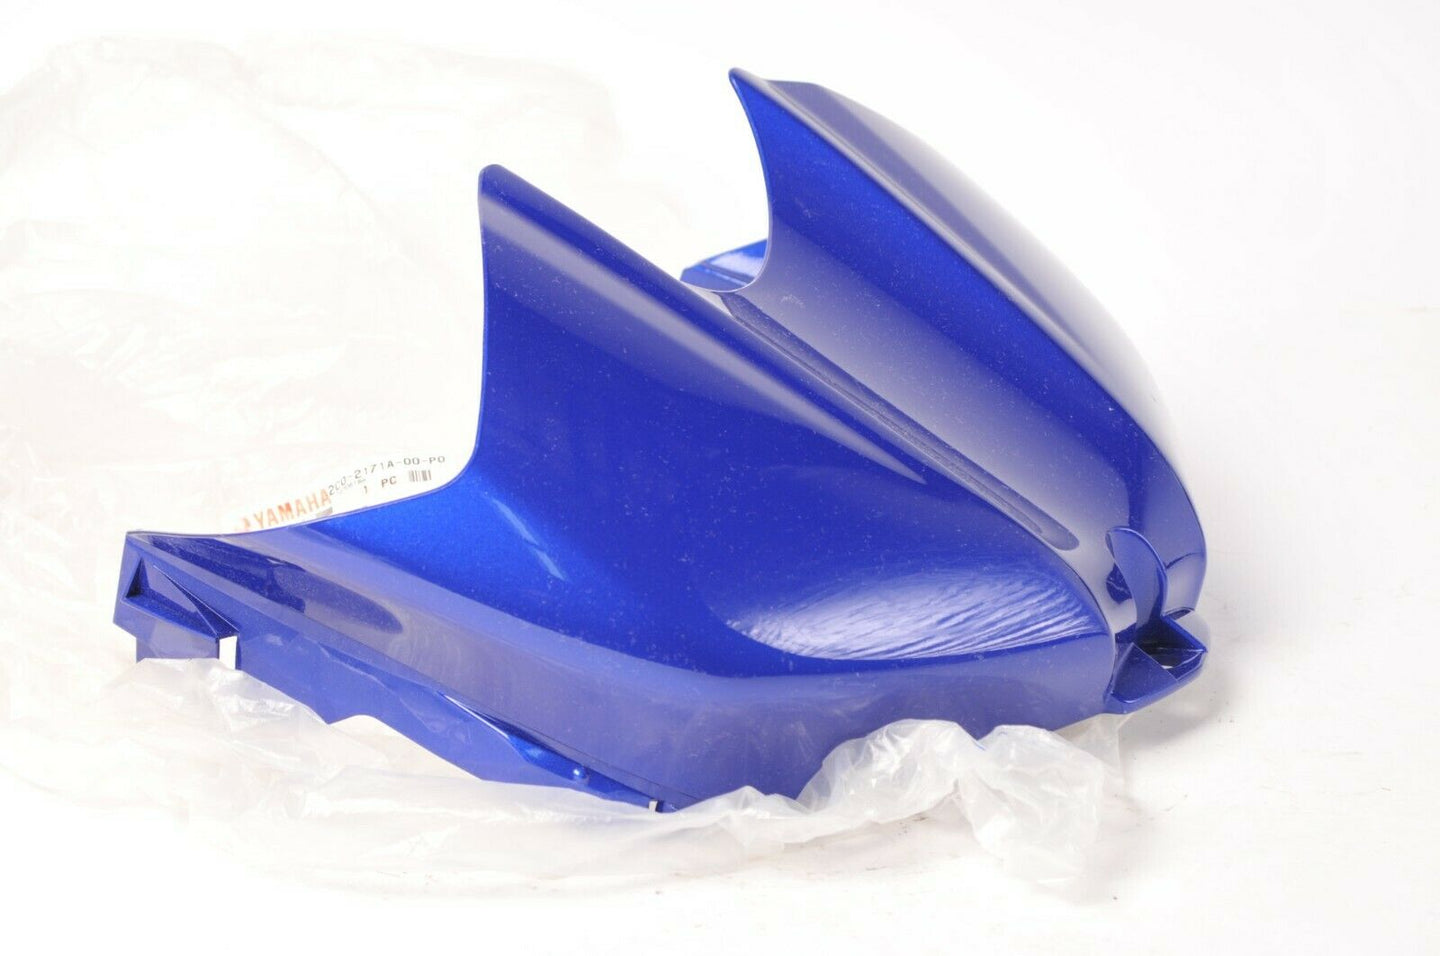 Genuine Yamaha 2C0-2171A-00-P0 Top Cover (fuel tank cover) YZF-R6 2006-07 BLUE